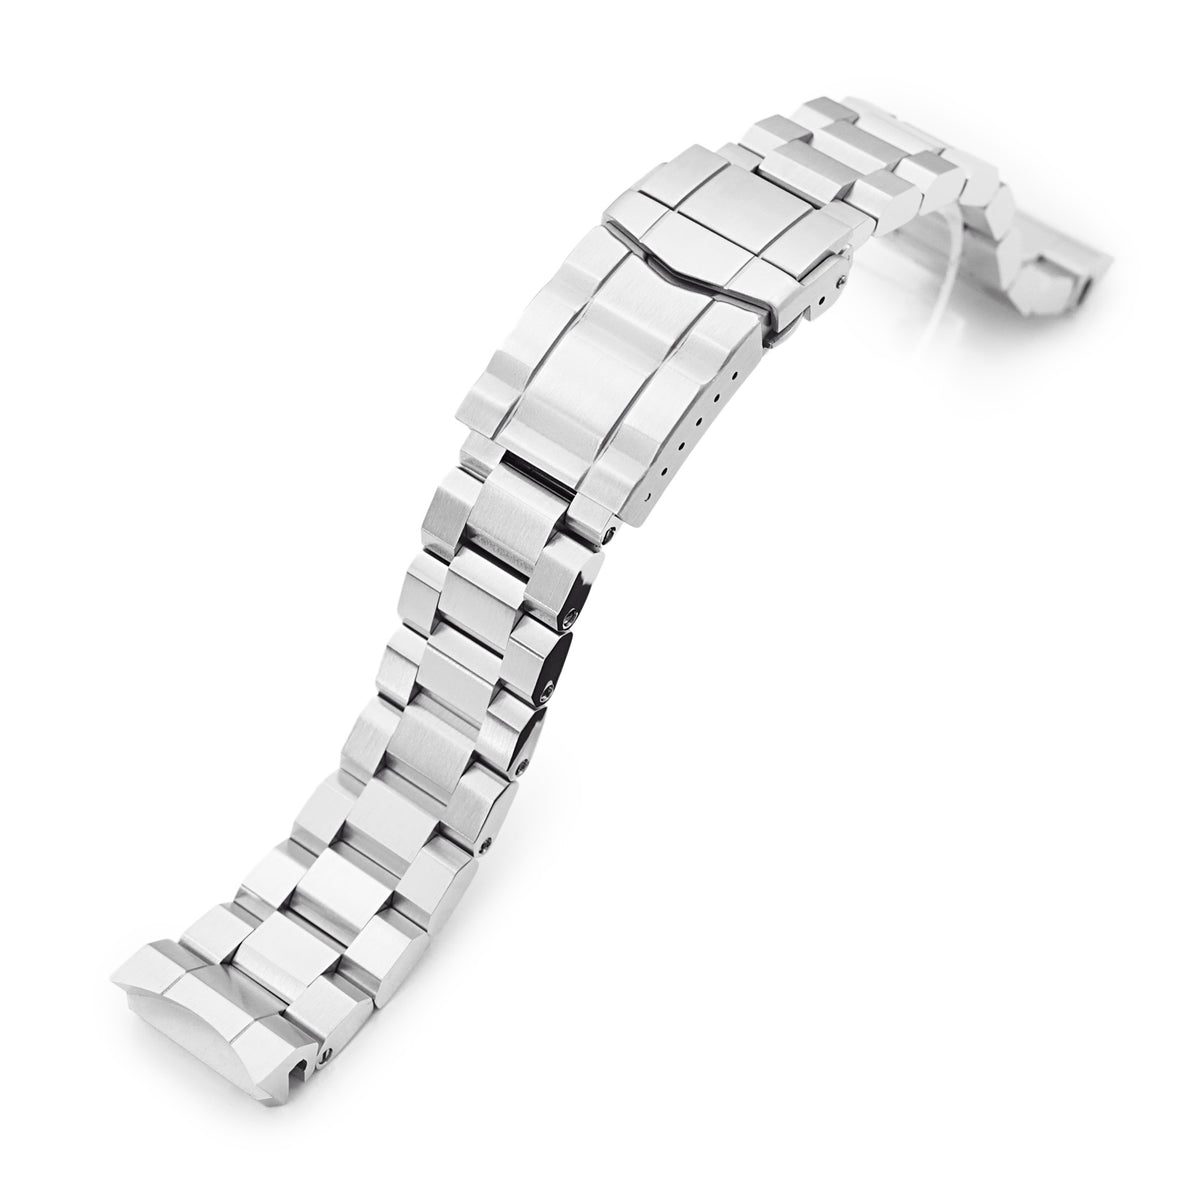 20mm Hexad Watch Band for Seiko MM300 Prospex Marinemaster SBDX001, 316L Stainless Steel SUB Diver Clasp Strapcode Watch Bands